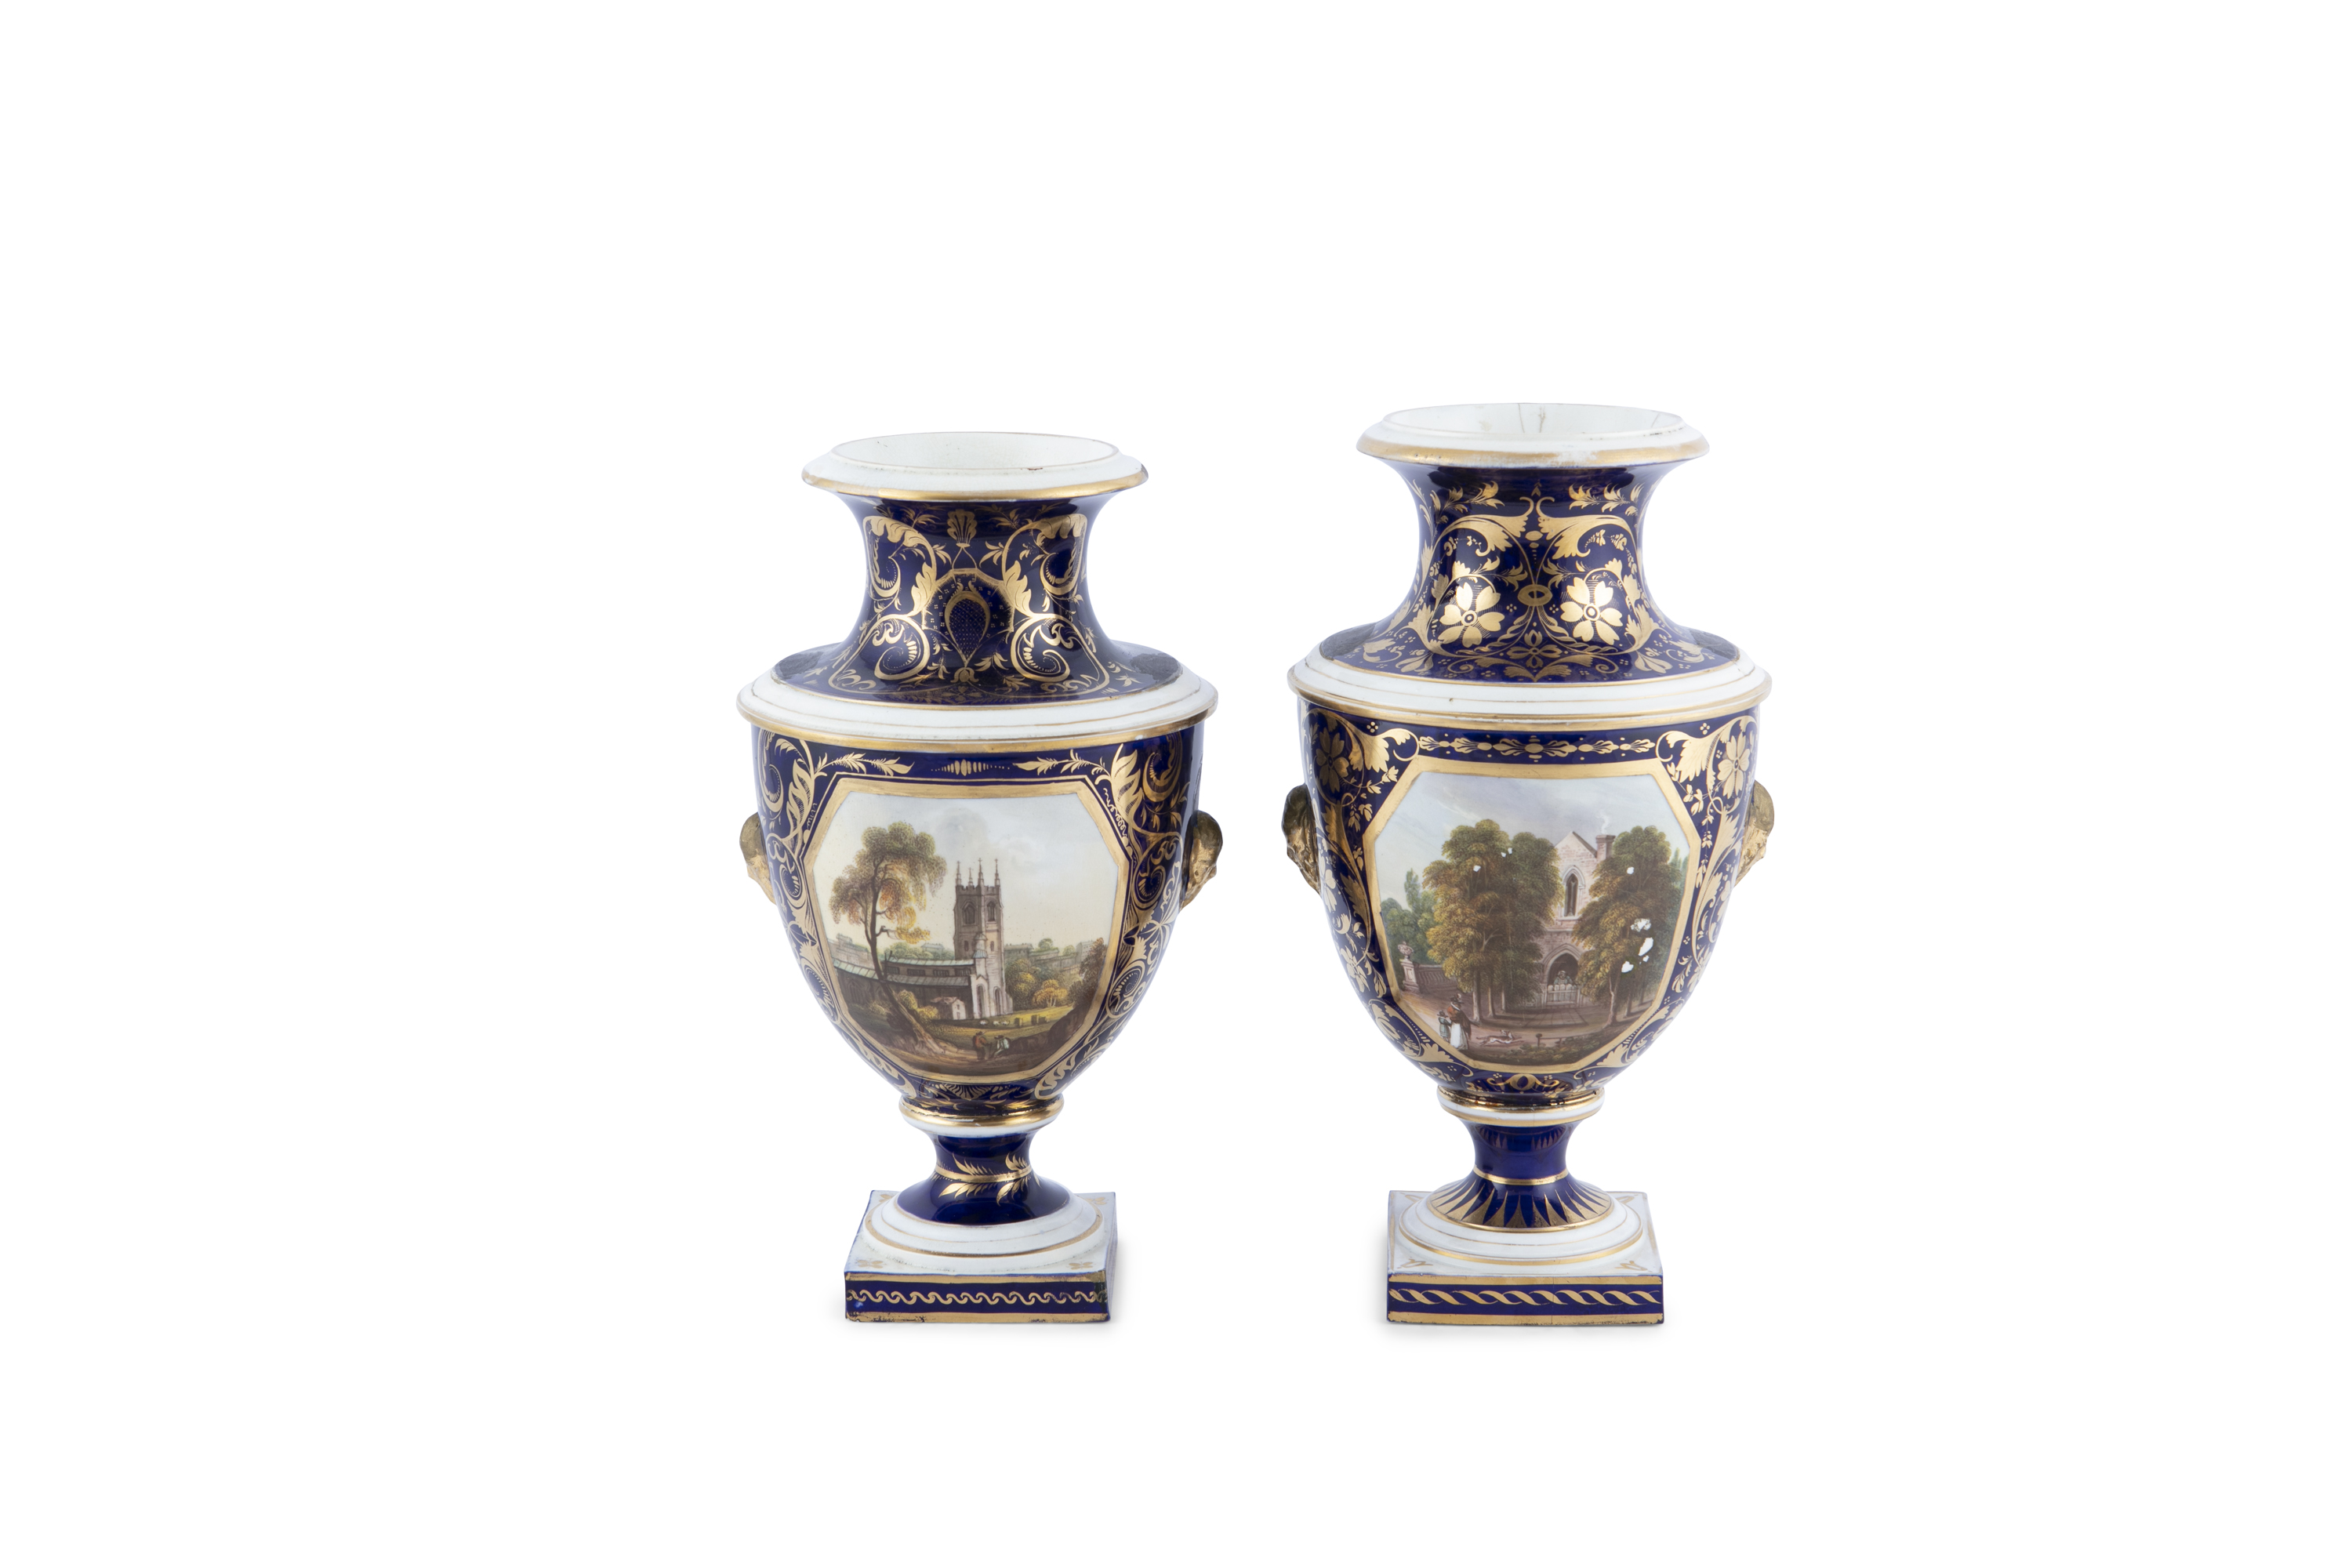 A PAIR OF BLOOR DERBY PAINTED PORCELAIN VASES, c.1830, depicting 'A view in Kent' and 'Chipping